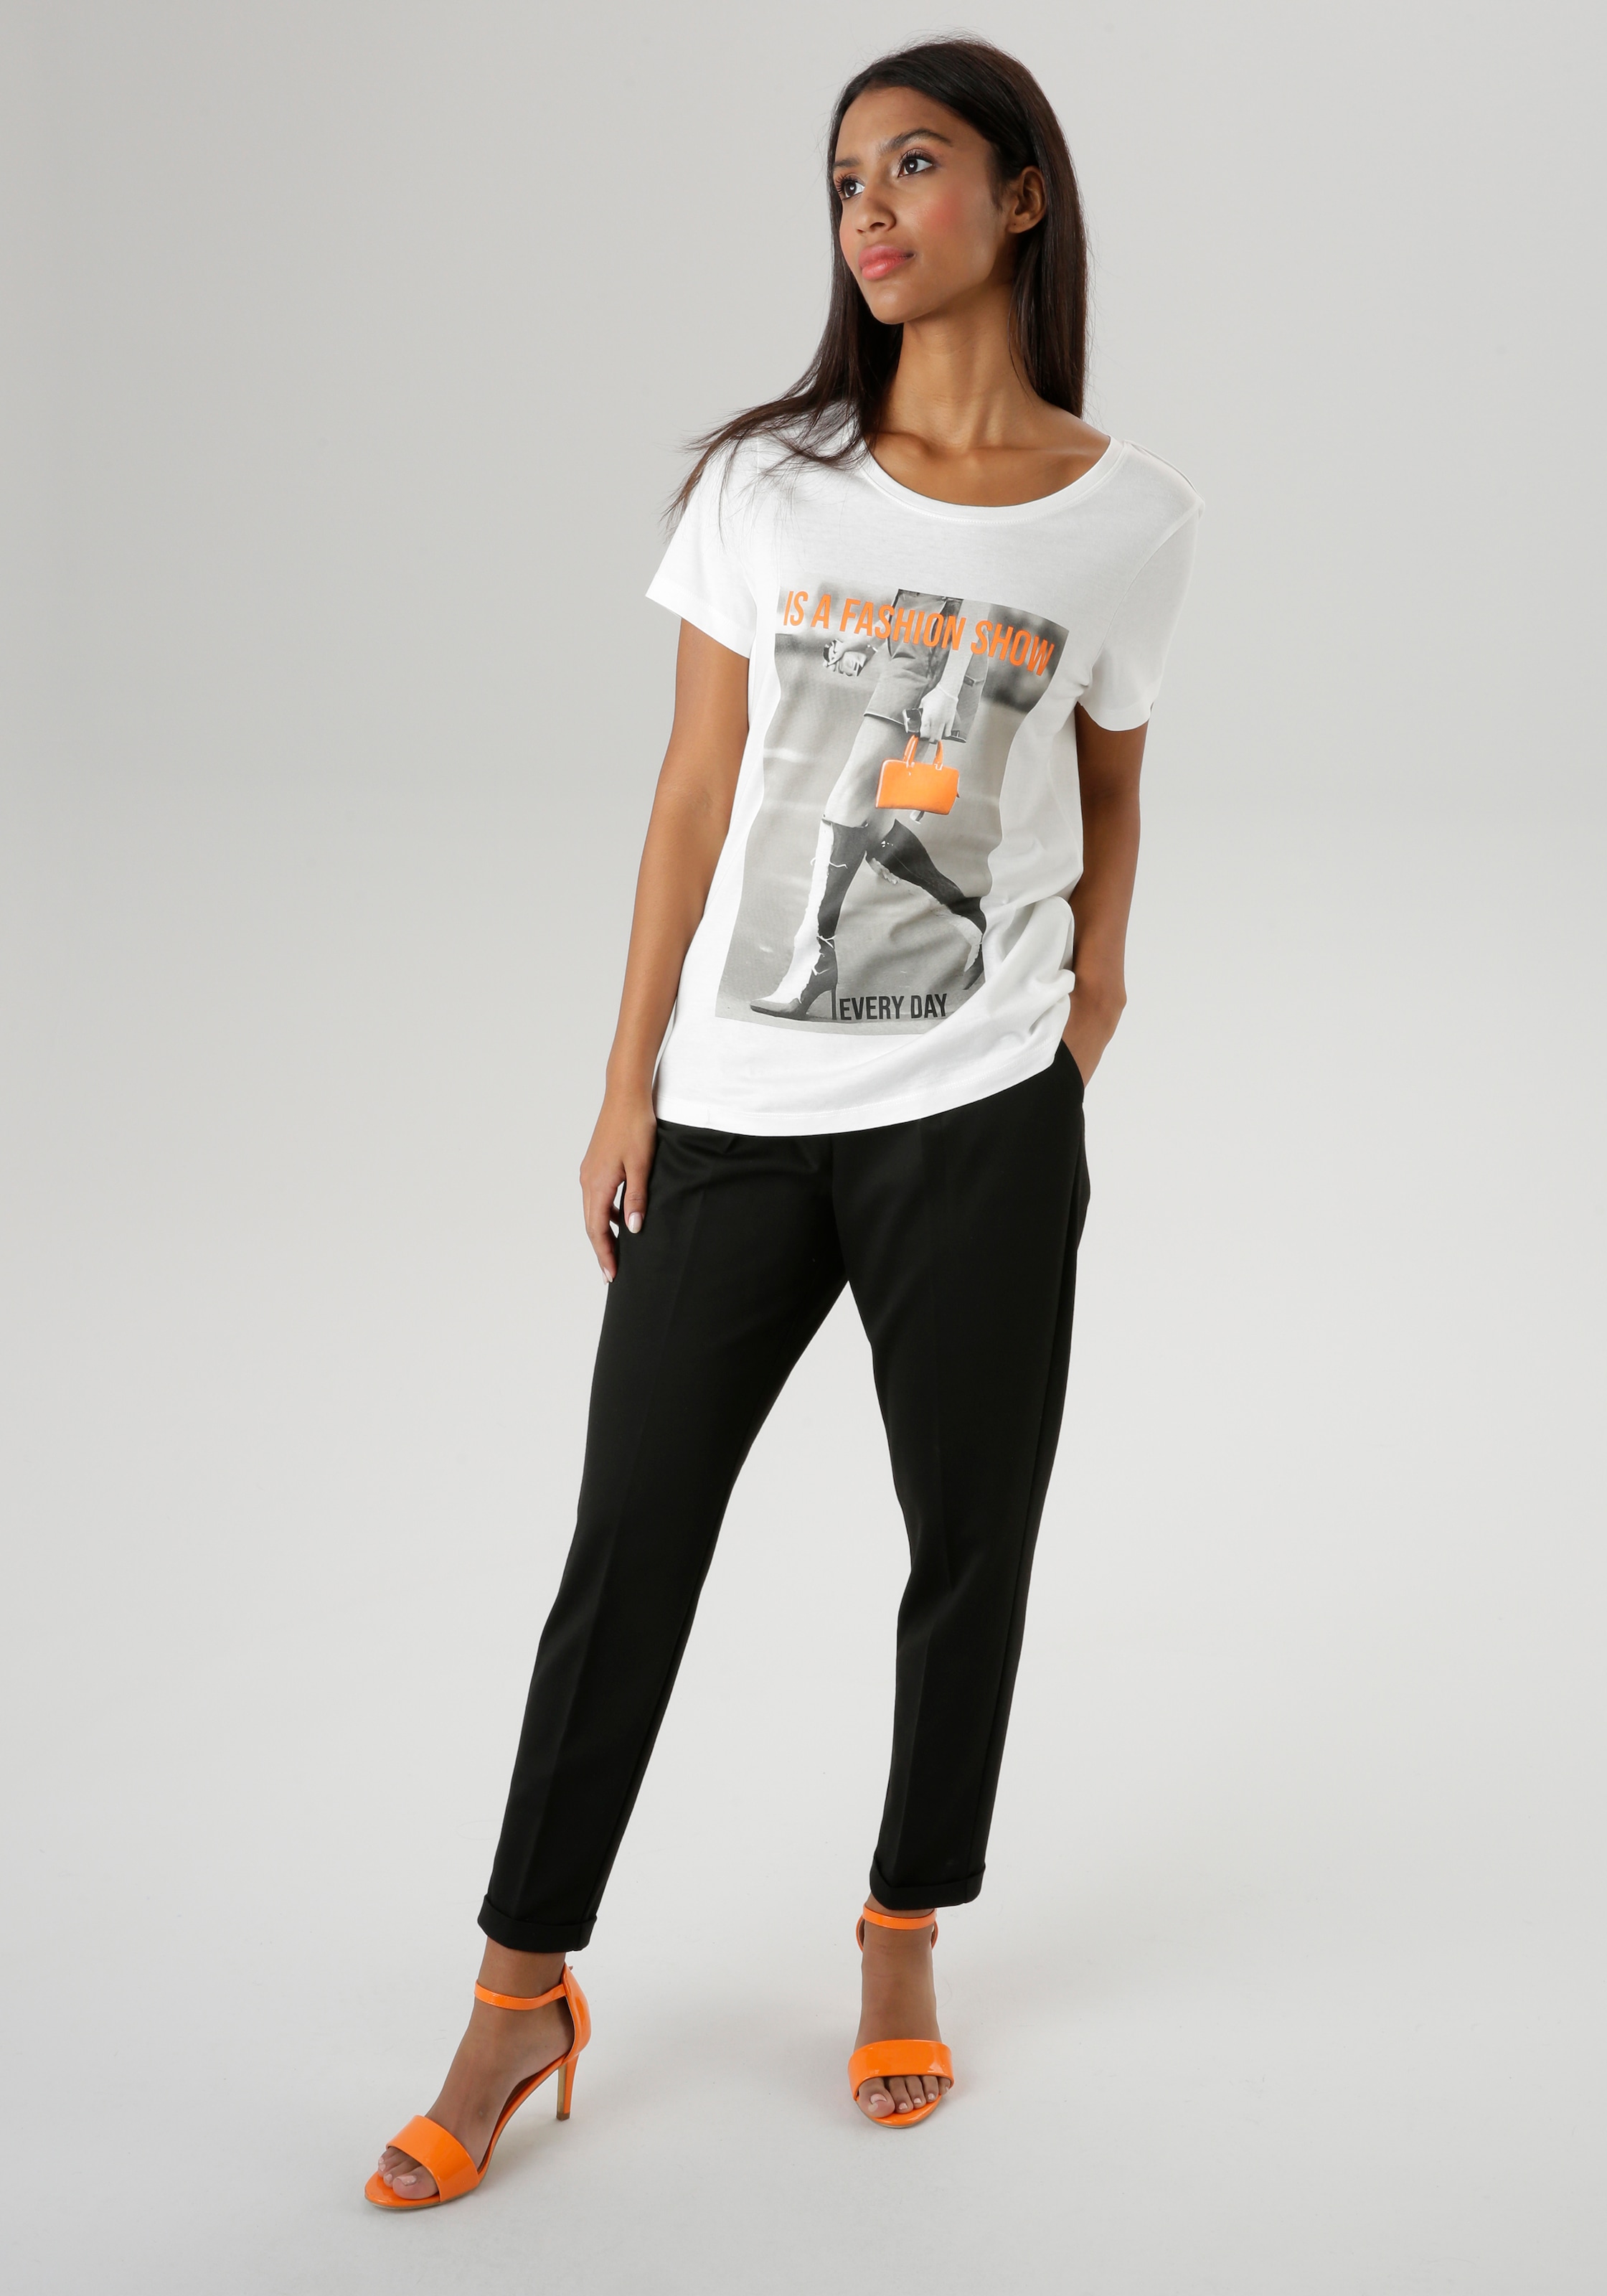 Aniston SELECTED T-Shirt, mit topmodischem Print "every day is a fashion show"- NEUE KOLLEKTION